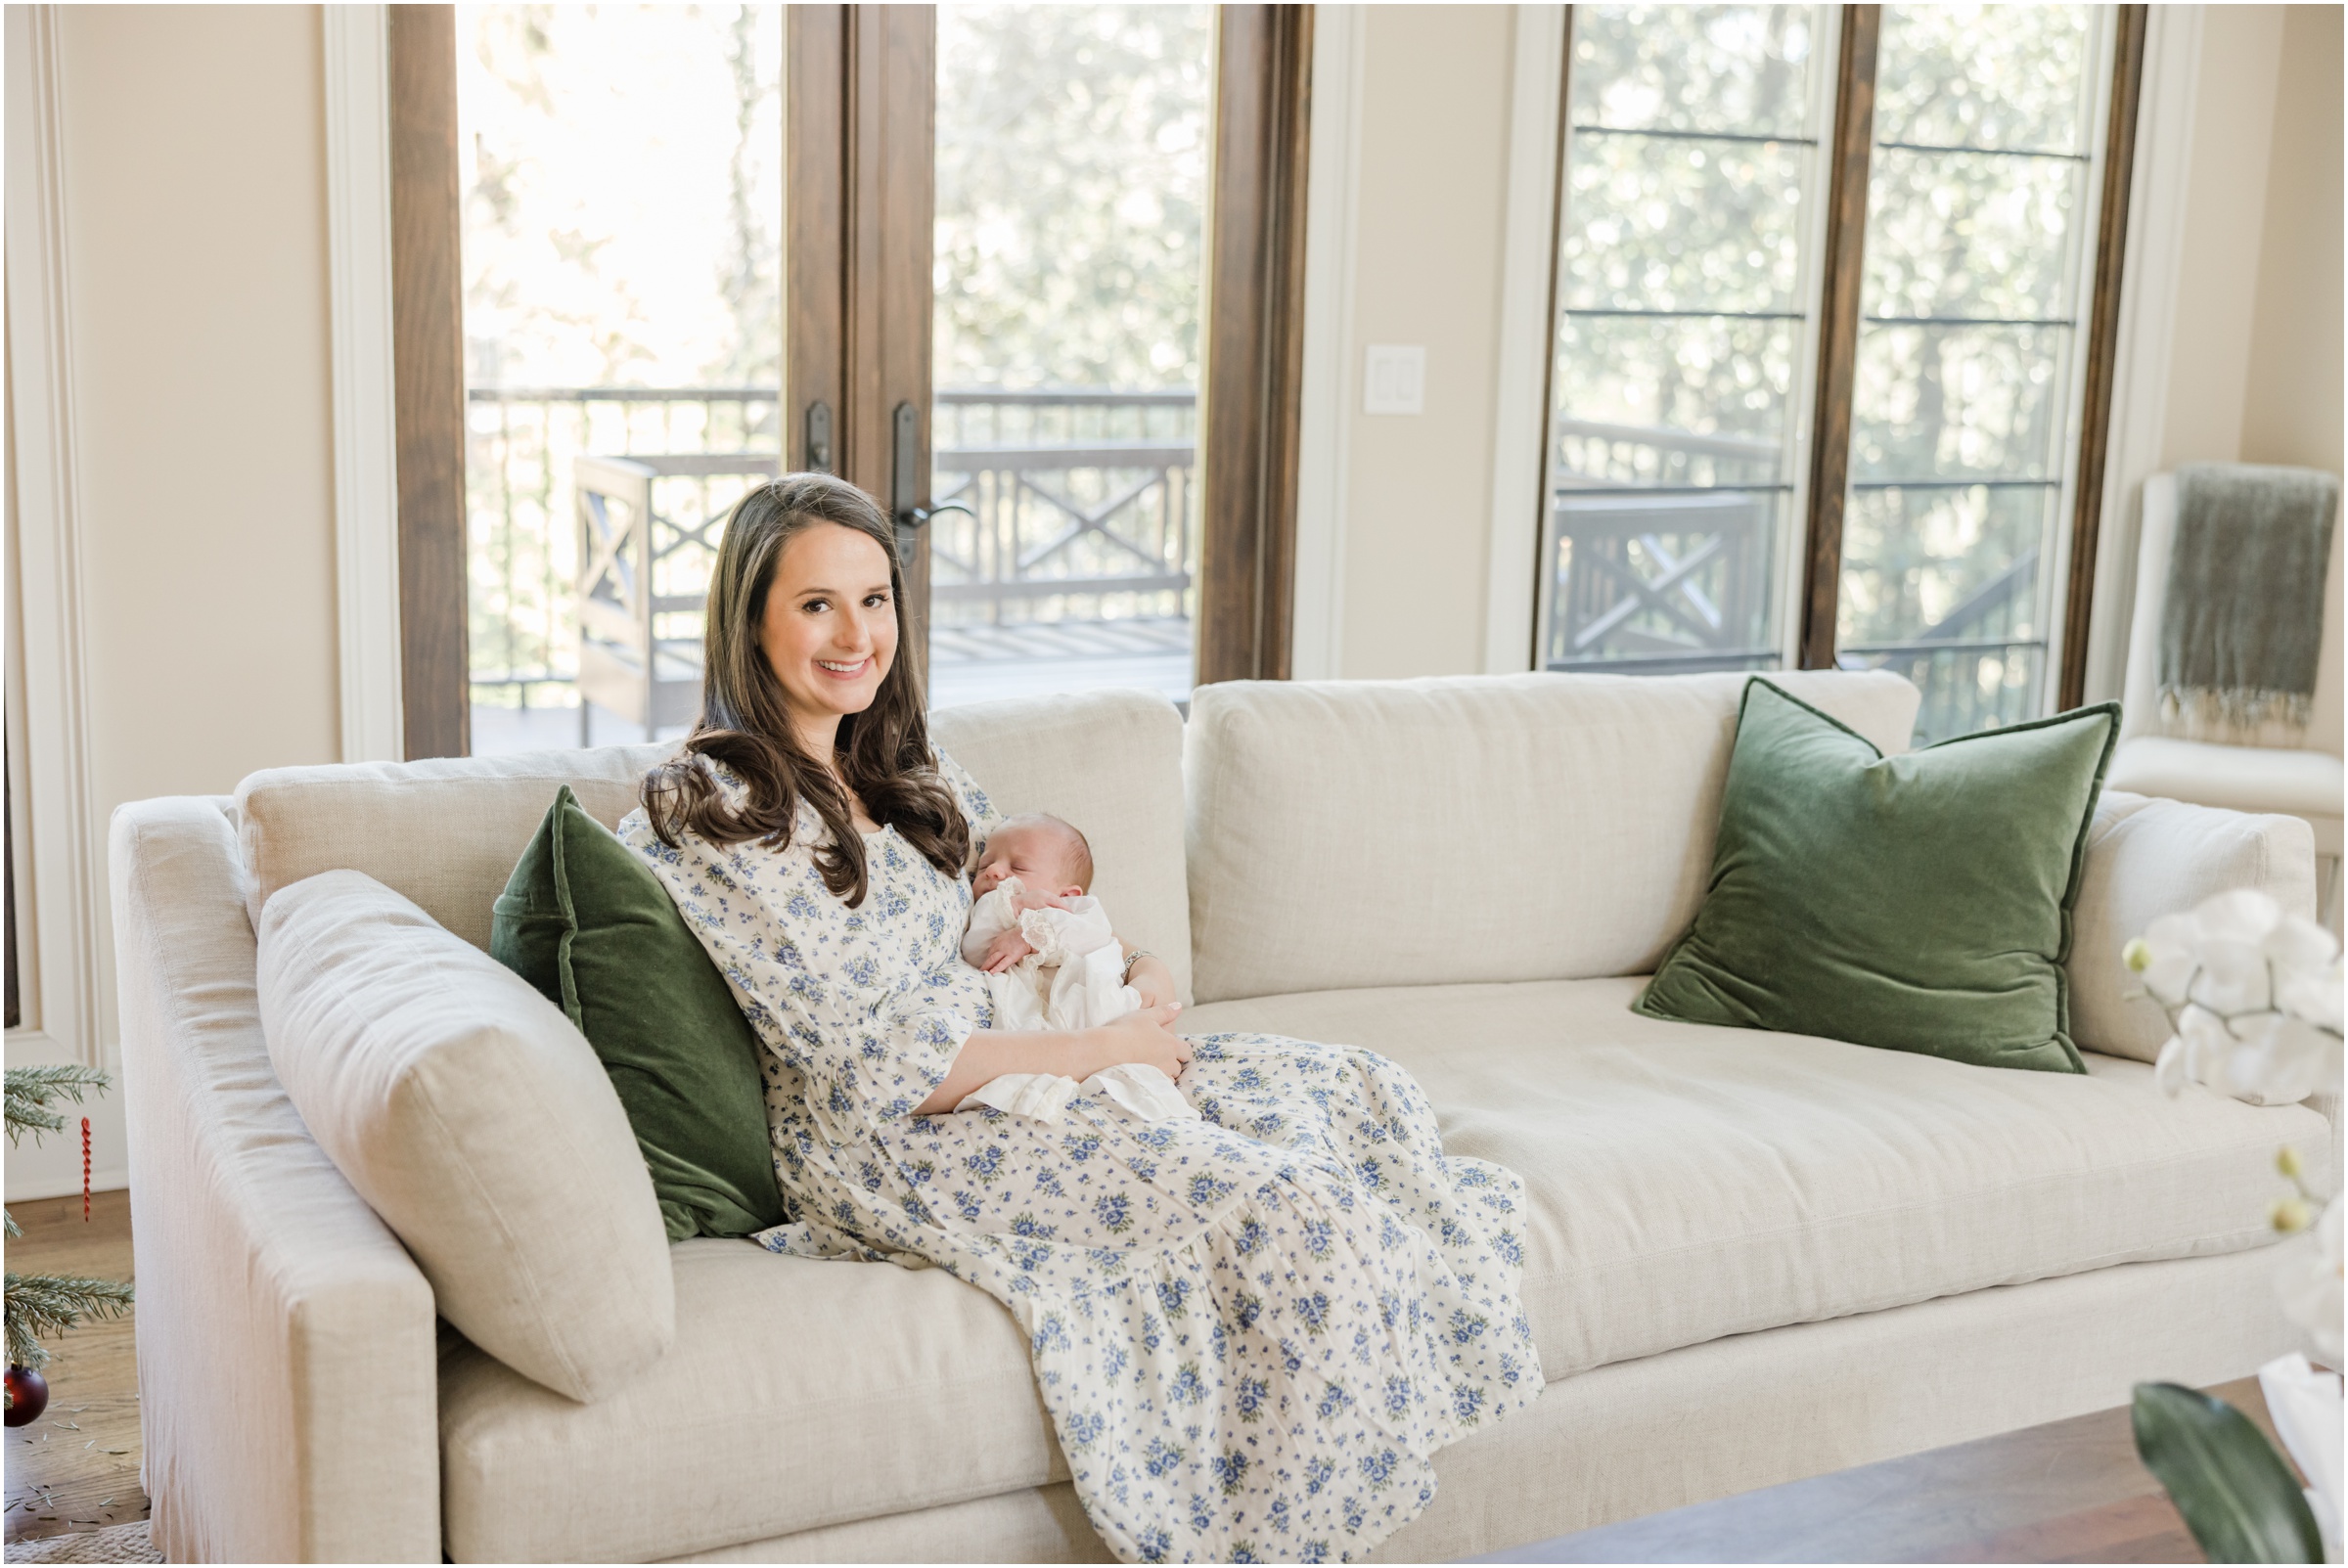 Portrait of a young mother in a blue floral dress holding her newborn son on a tan couch in front of large windows smiling for a photo taken by a Greenville newborn photographer.